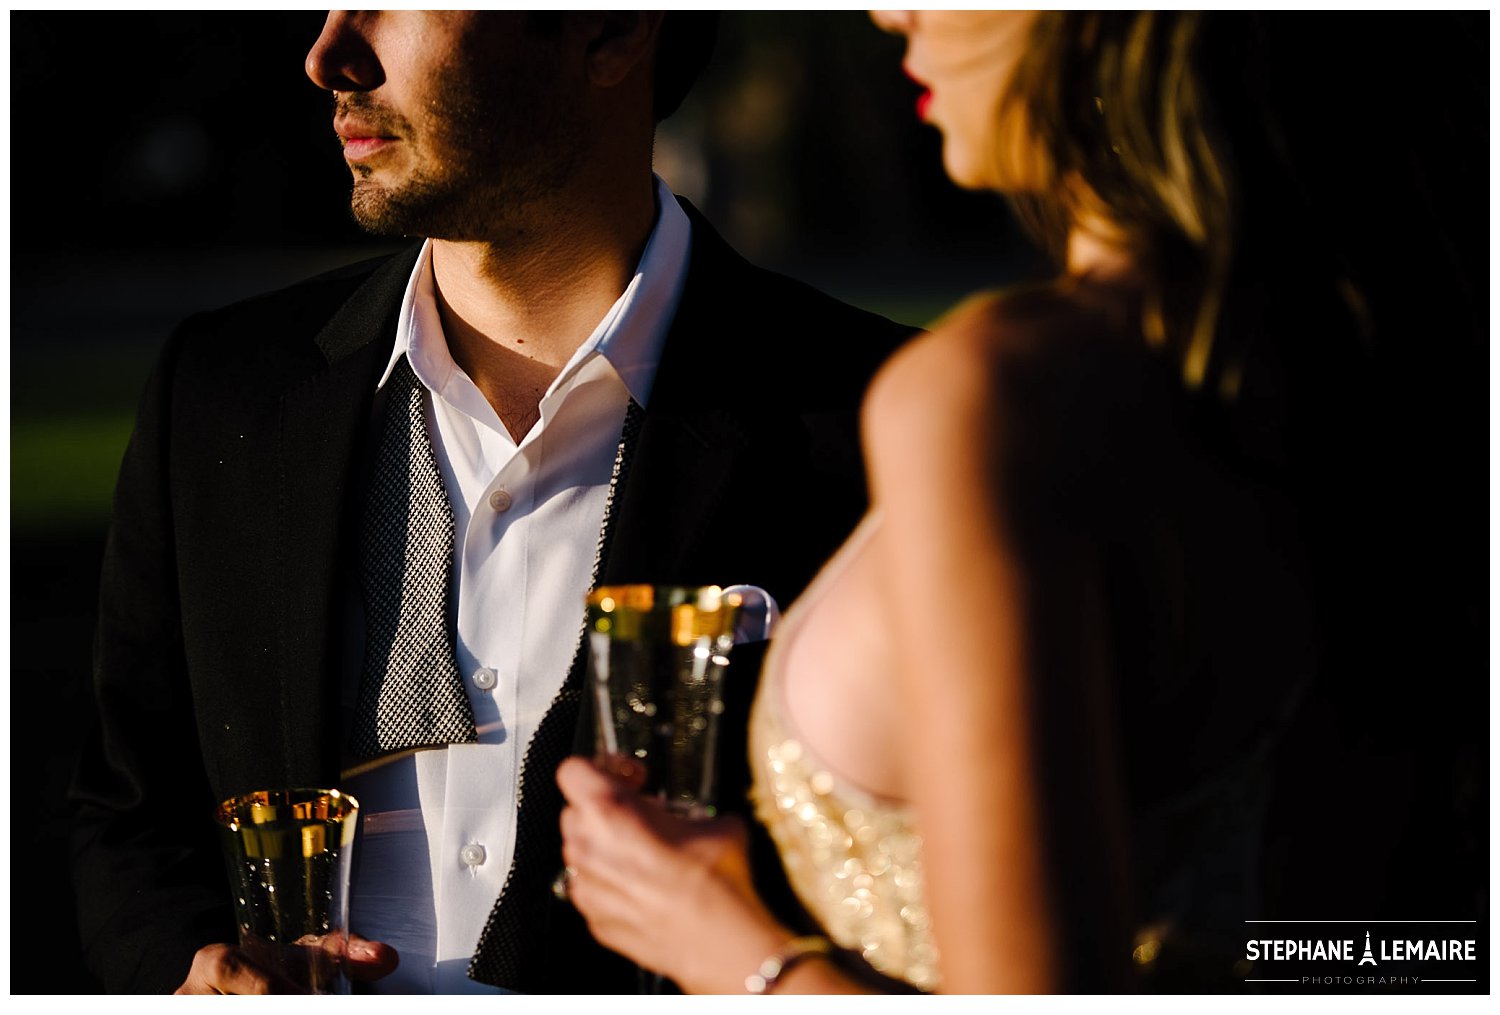 Details of couple in champagne dress and suit enjoying champagne in editorial style Marfa shoot 